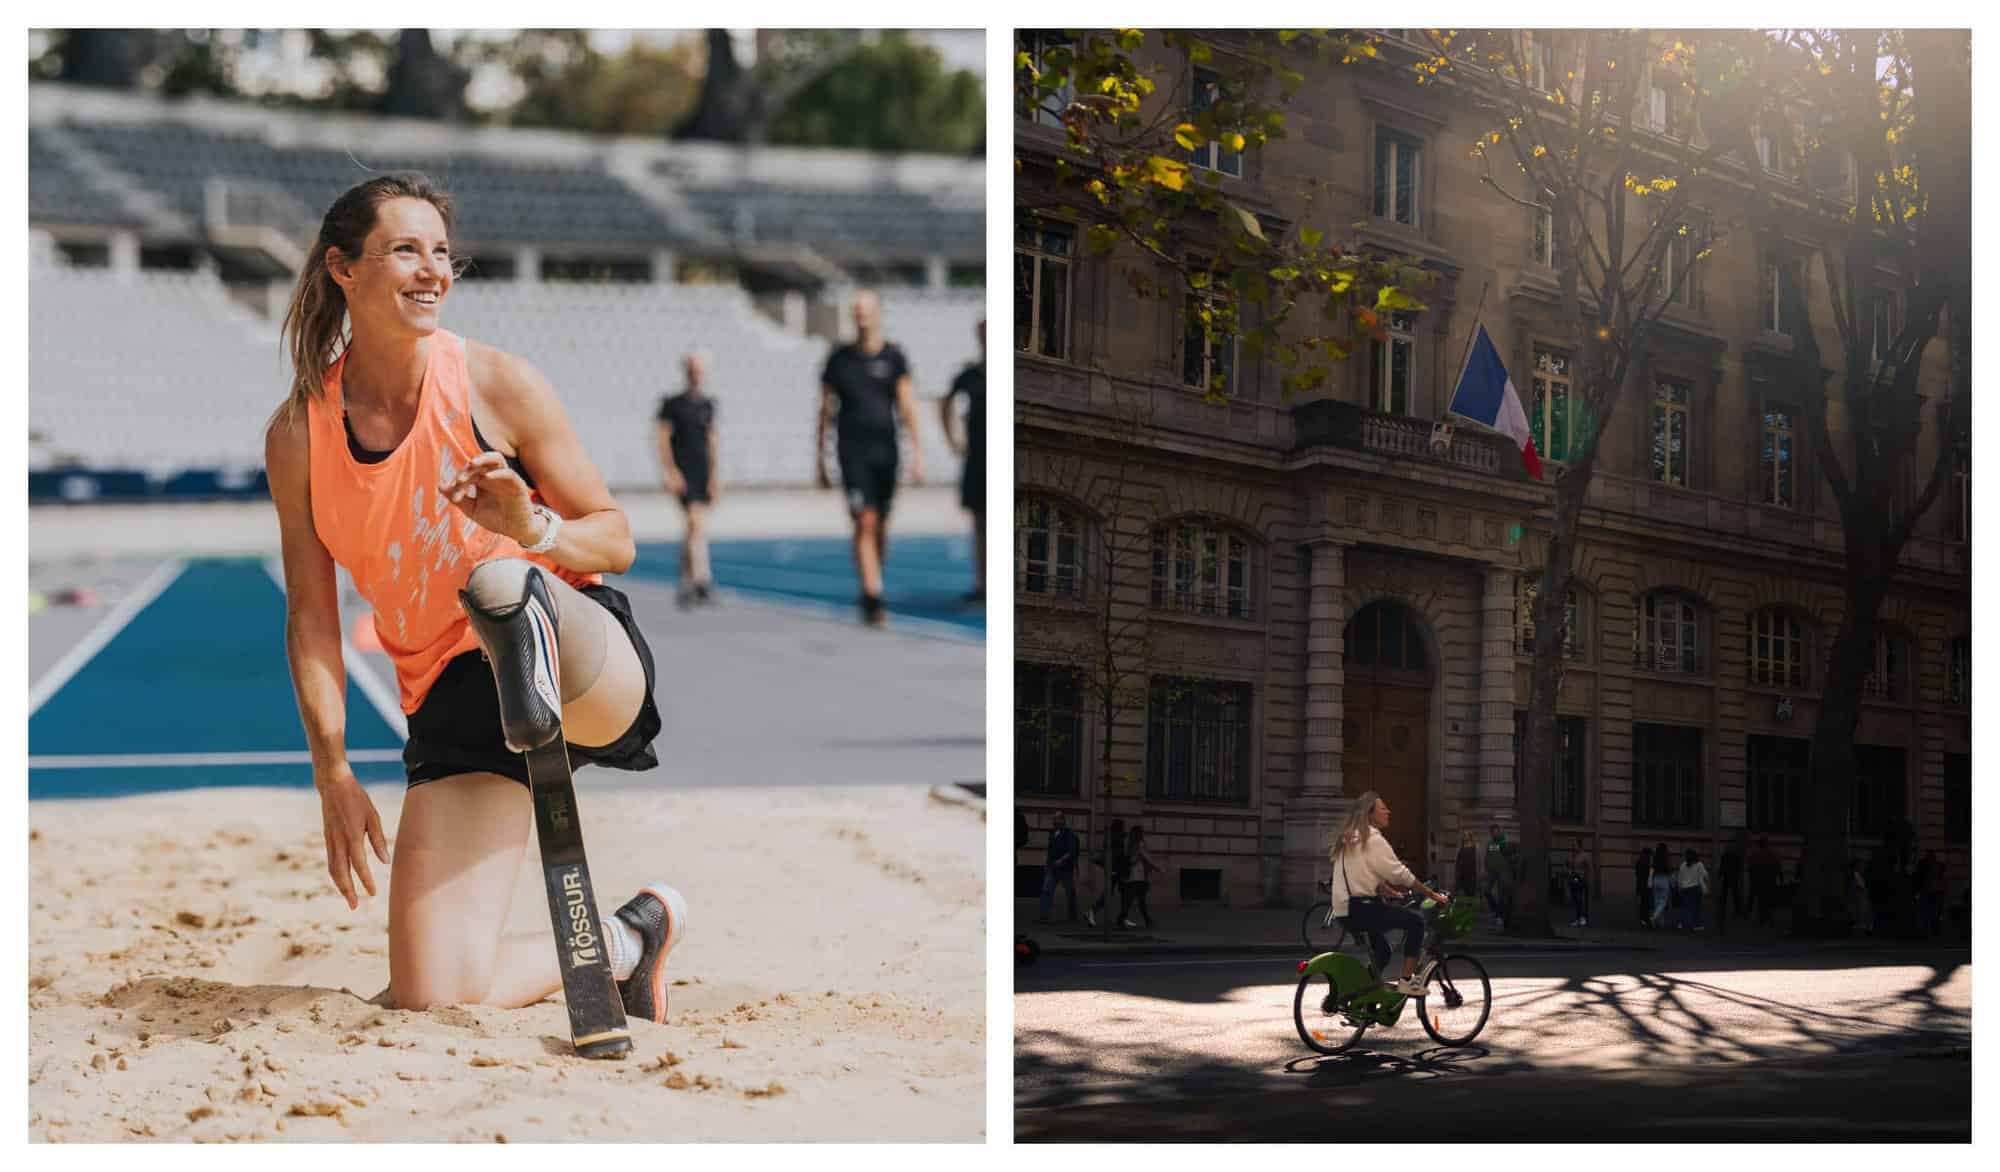 Left: A female athlete with an artificial left leg smiles in her orange shirt. Right: A woman in white shirt and black pants rides a green bicycle in Paris.